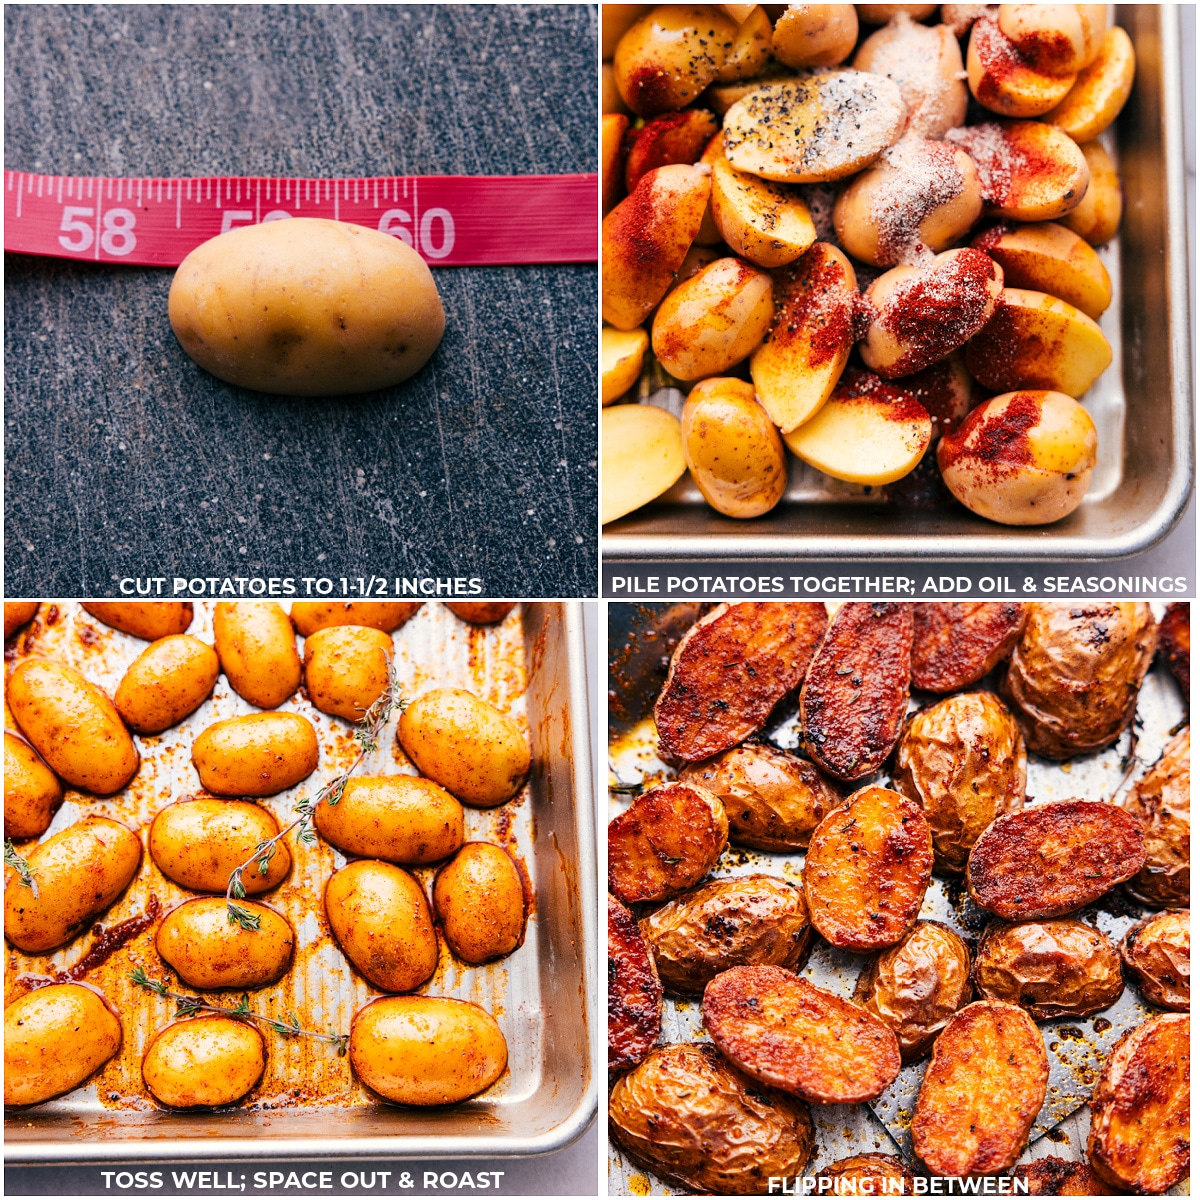 Cutting up the potatoes and then tossing them together with oil and seasonings, and baking it all to crispy perfection.